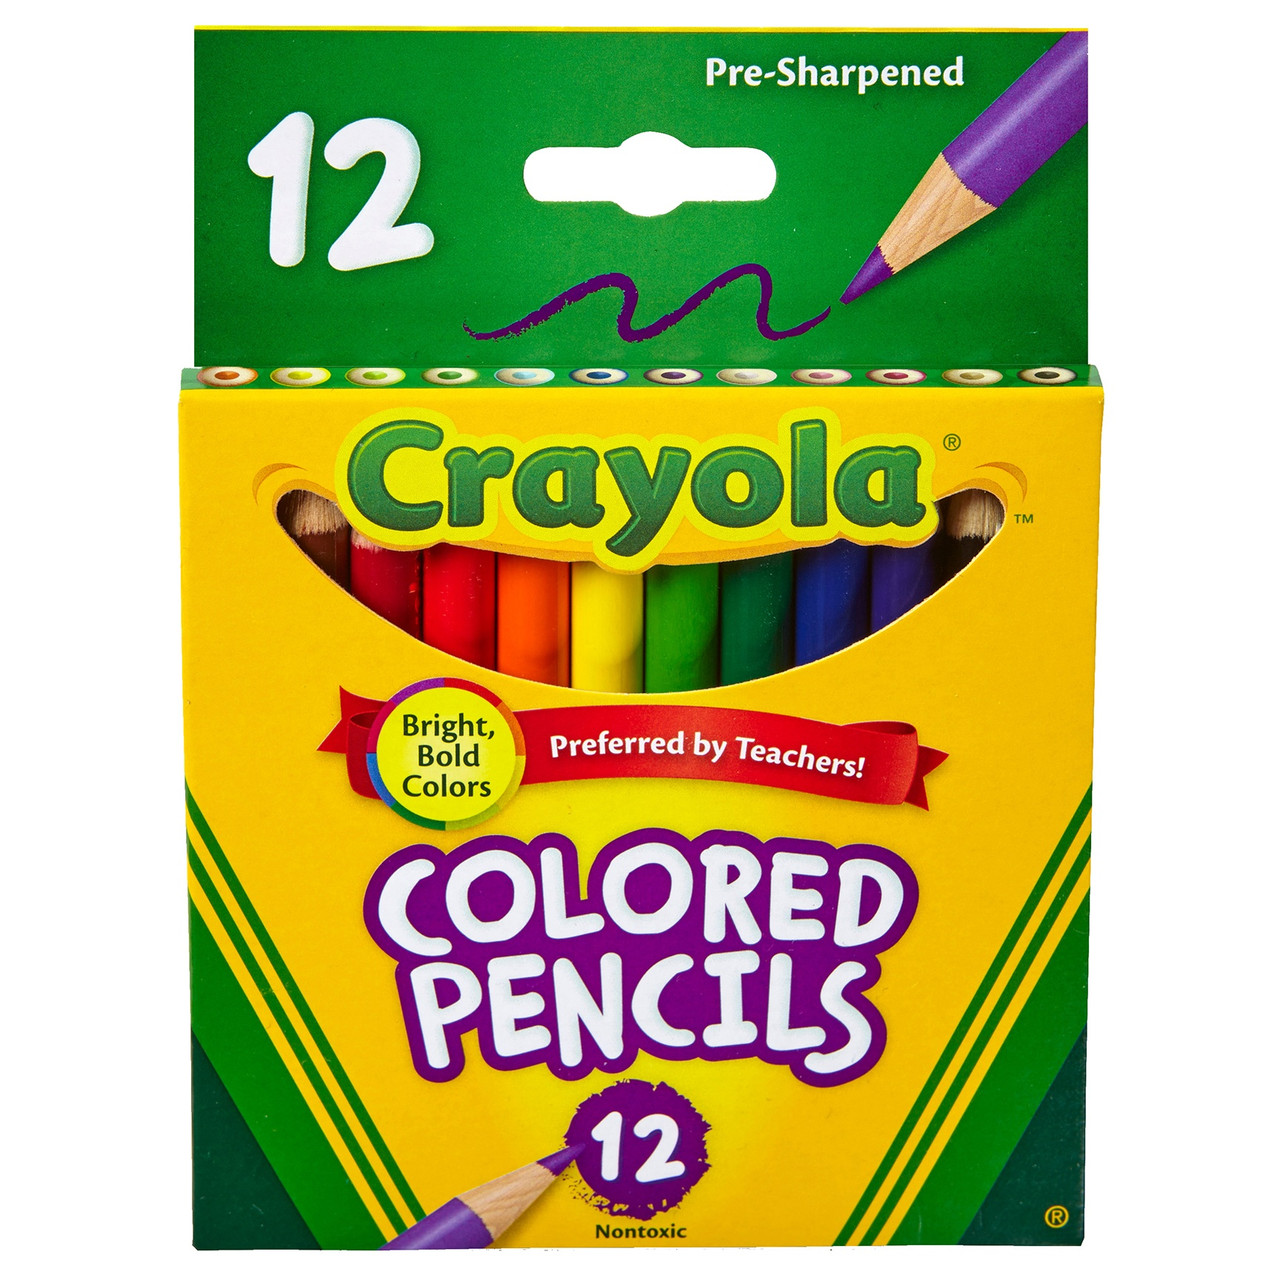 Crayola Bold Bright Twistable Pencils Assorted Colors Pack Of 12